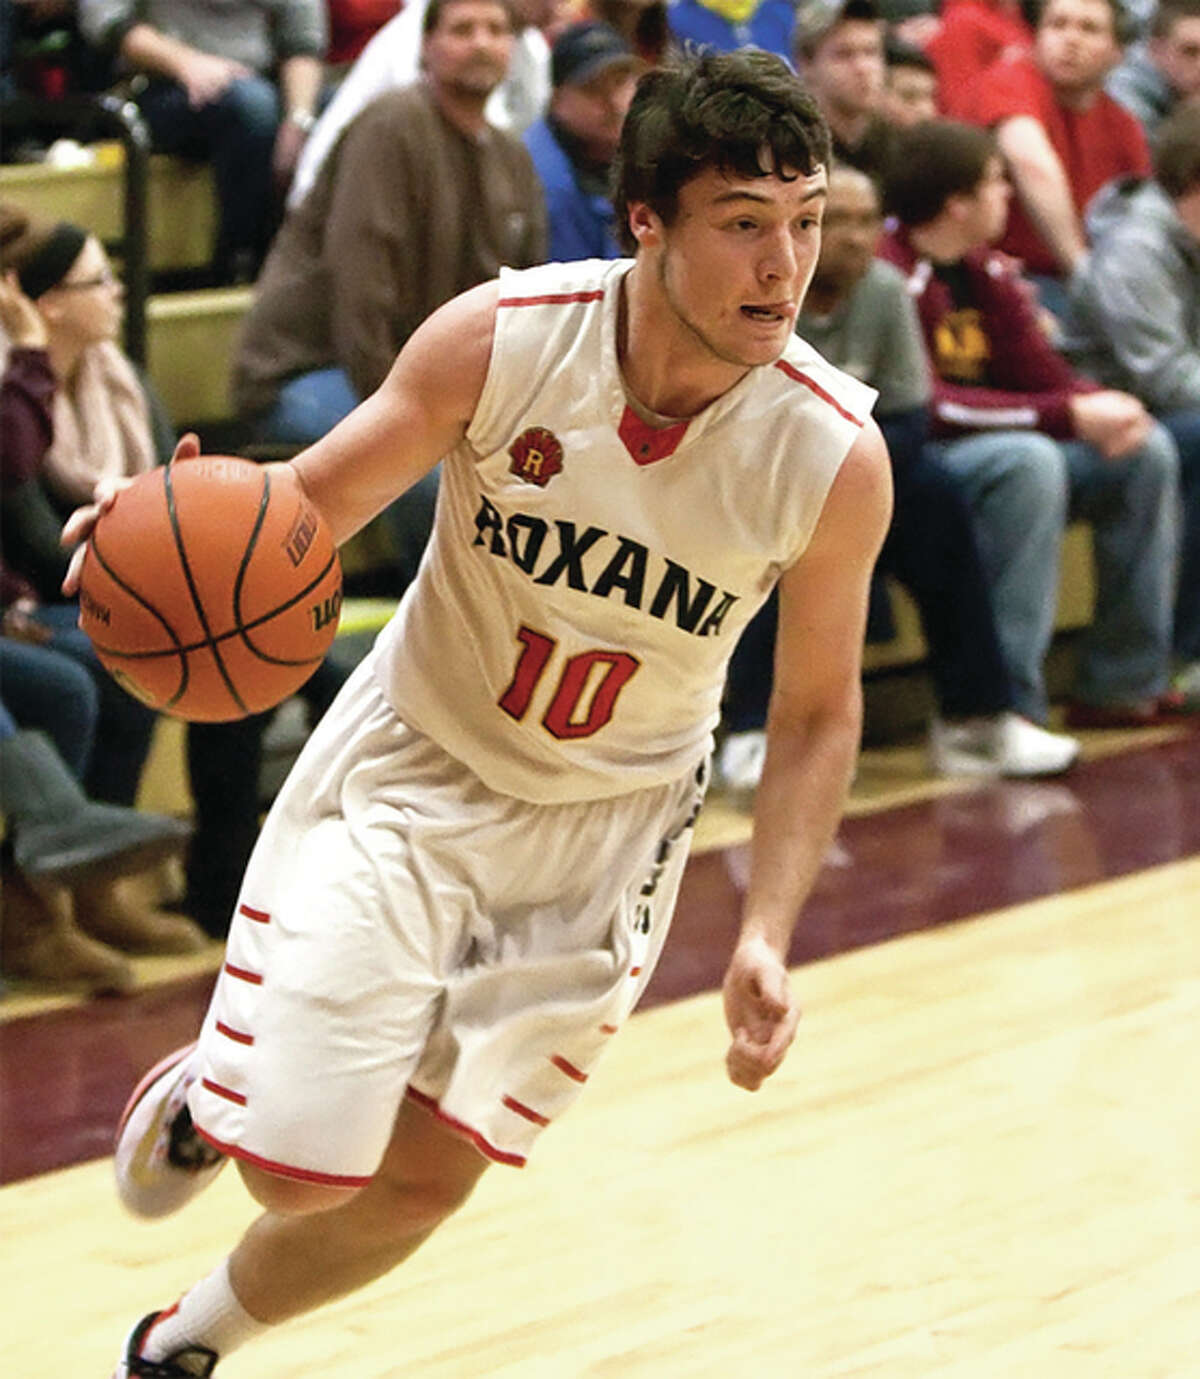 Roxana’s Trace Gentry is back for his senior season after leading the Shells in scoring at 15.8 points per game as a junior. Gentry was a first team All-SCC selection last year.